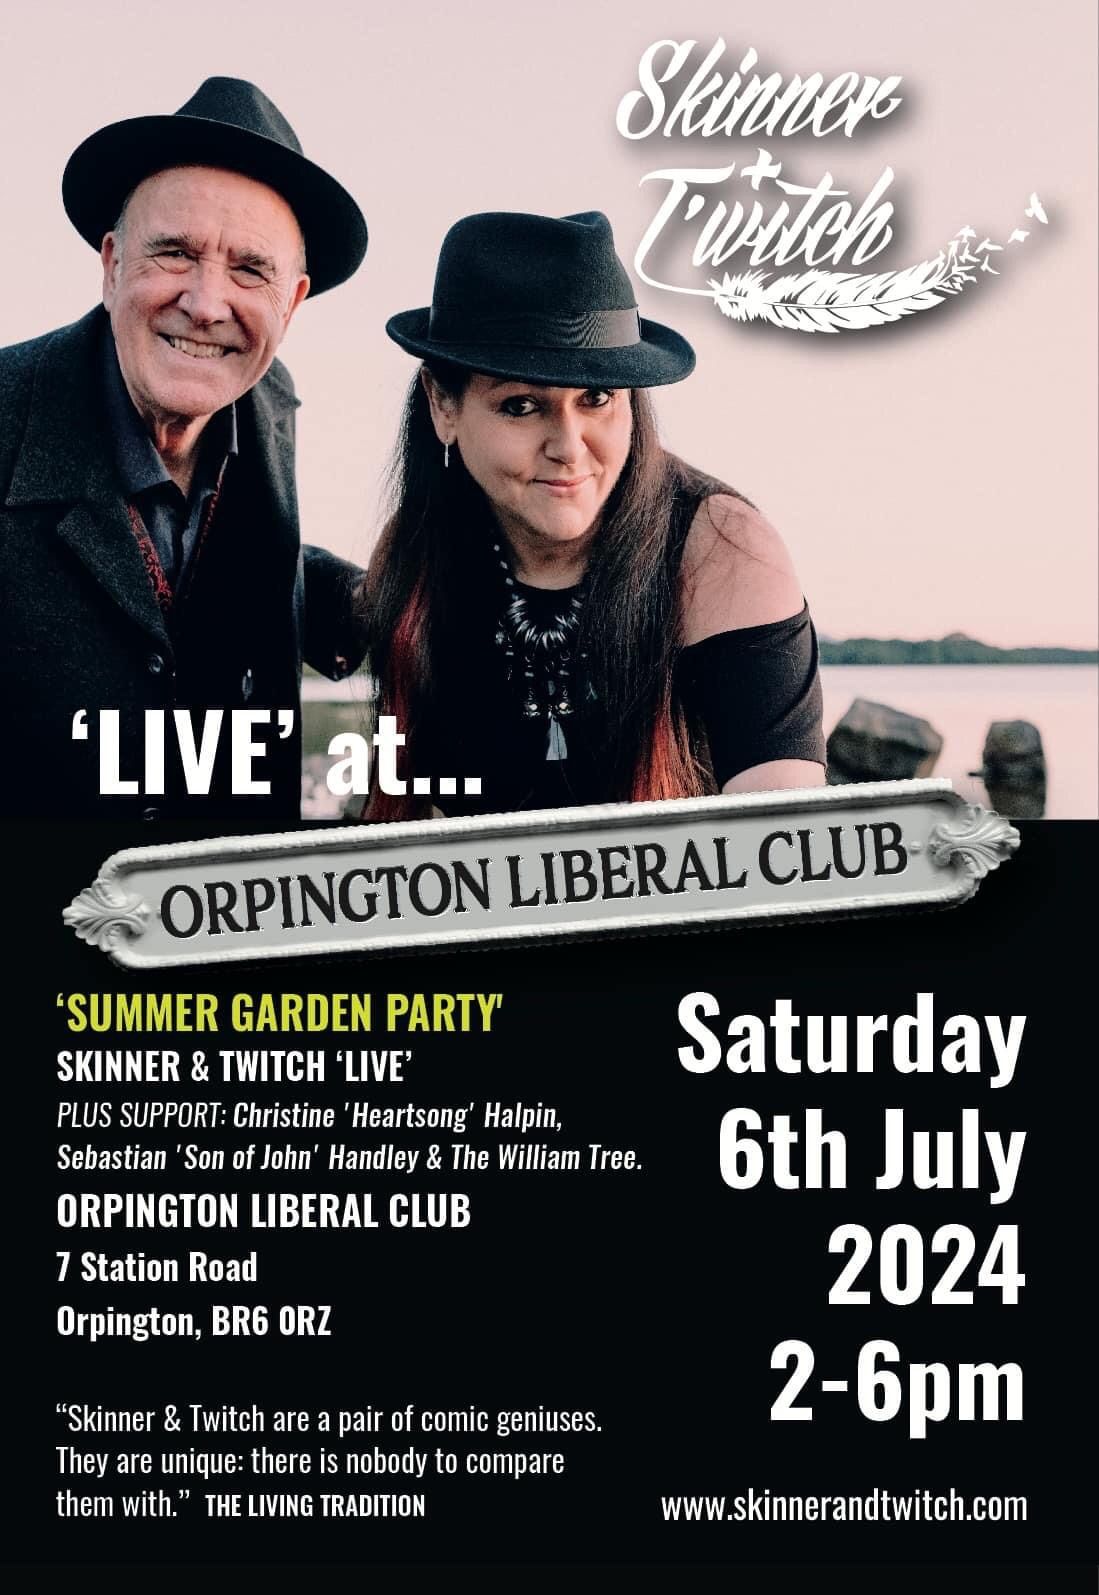 Skinner & T'witch Live at Orpington Liberal Club